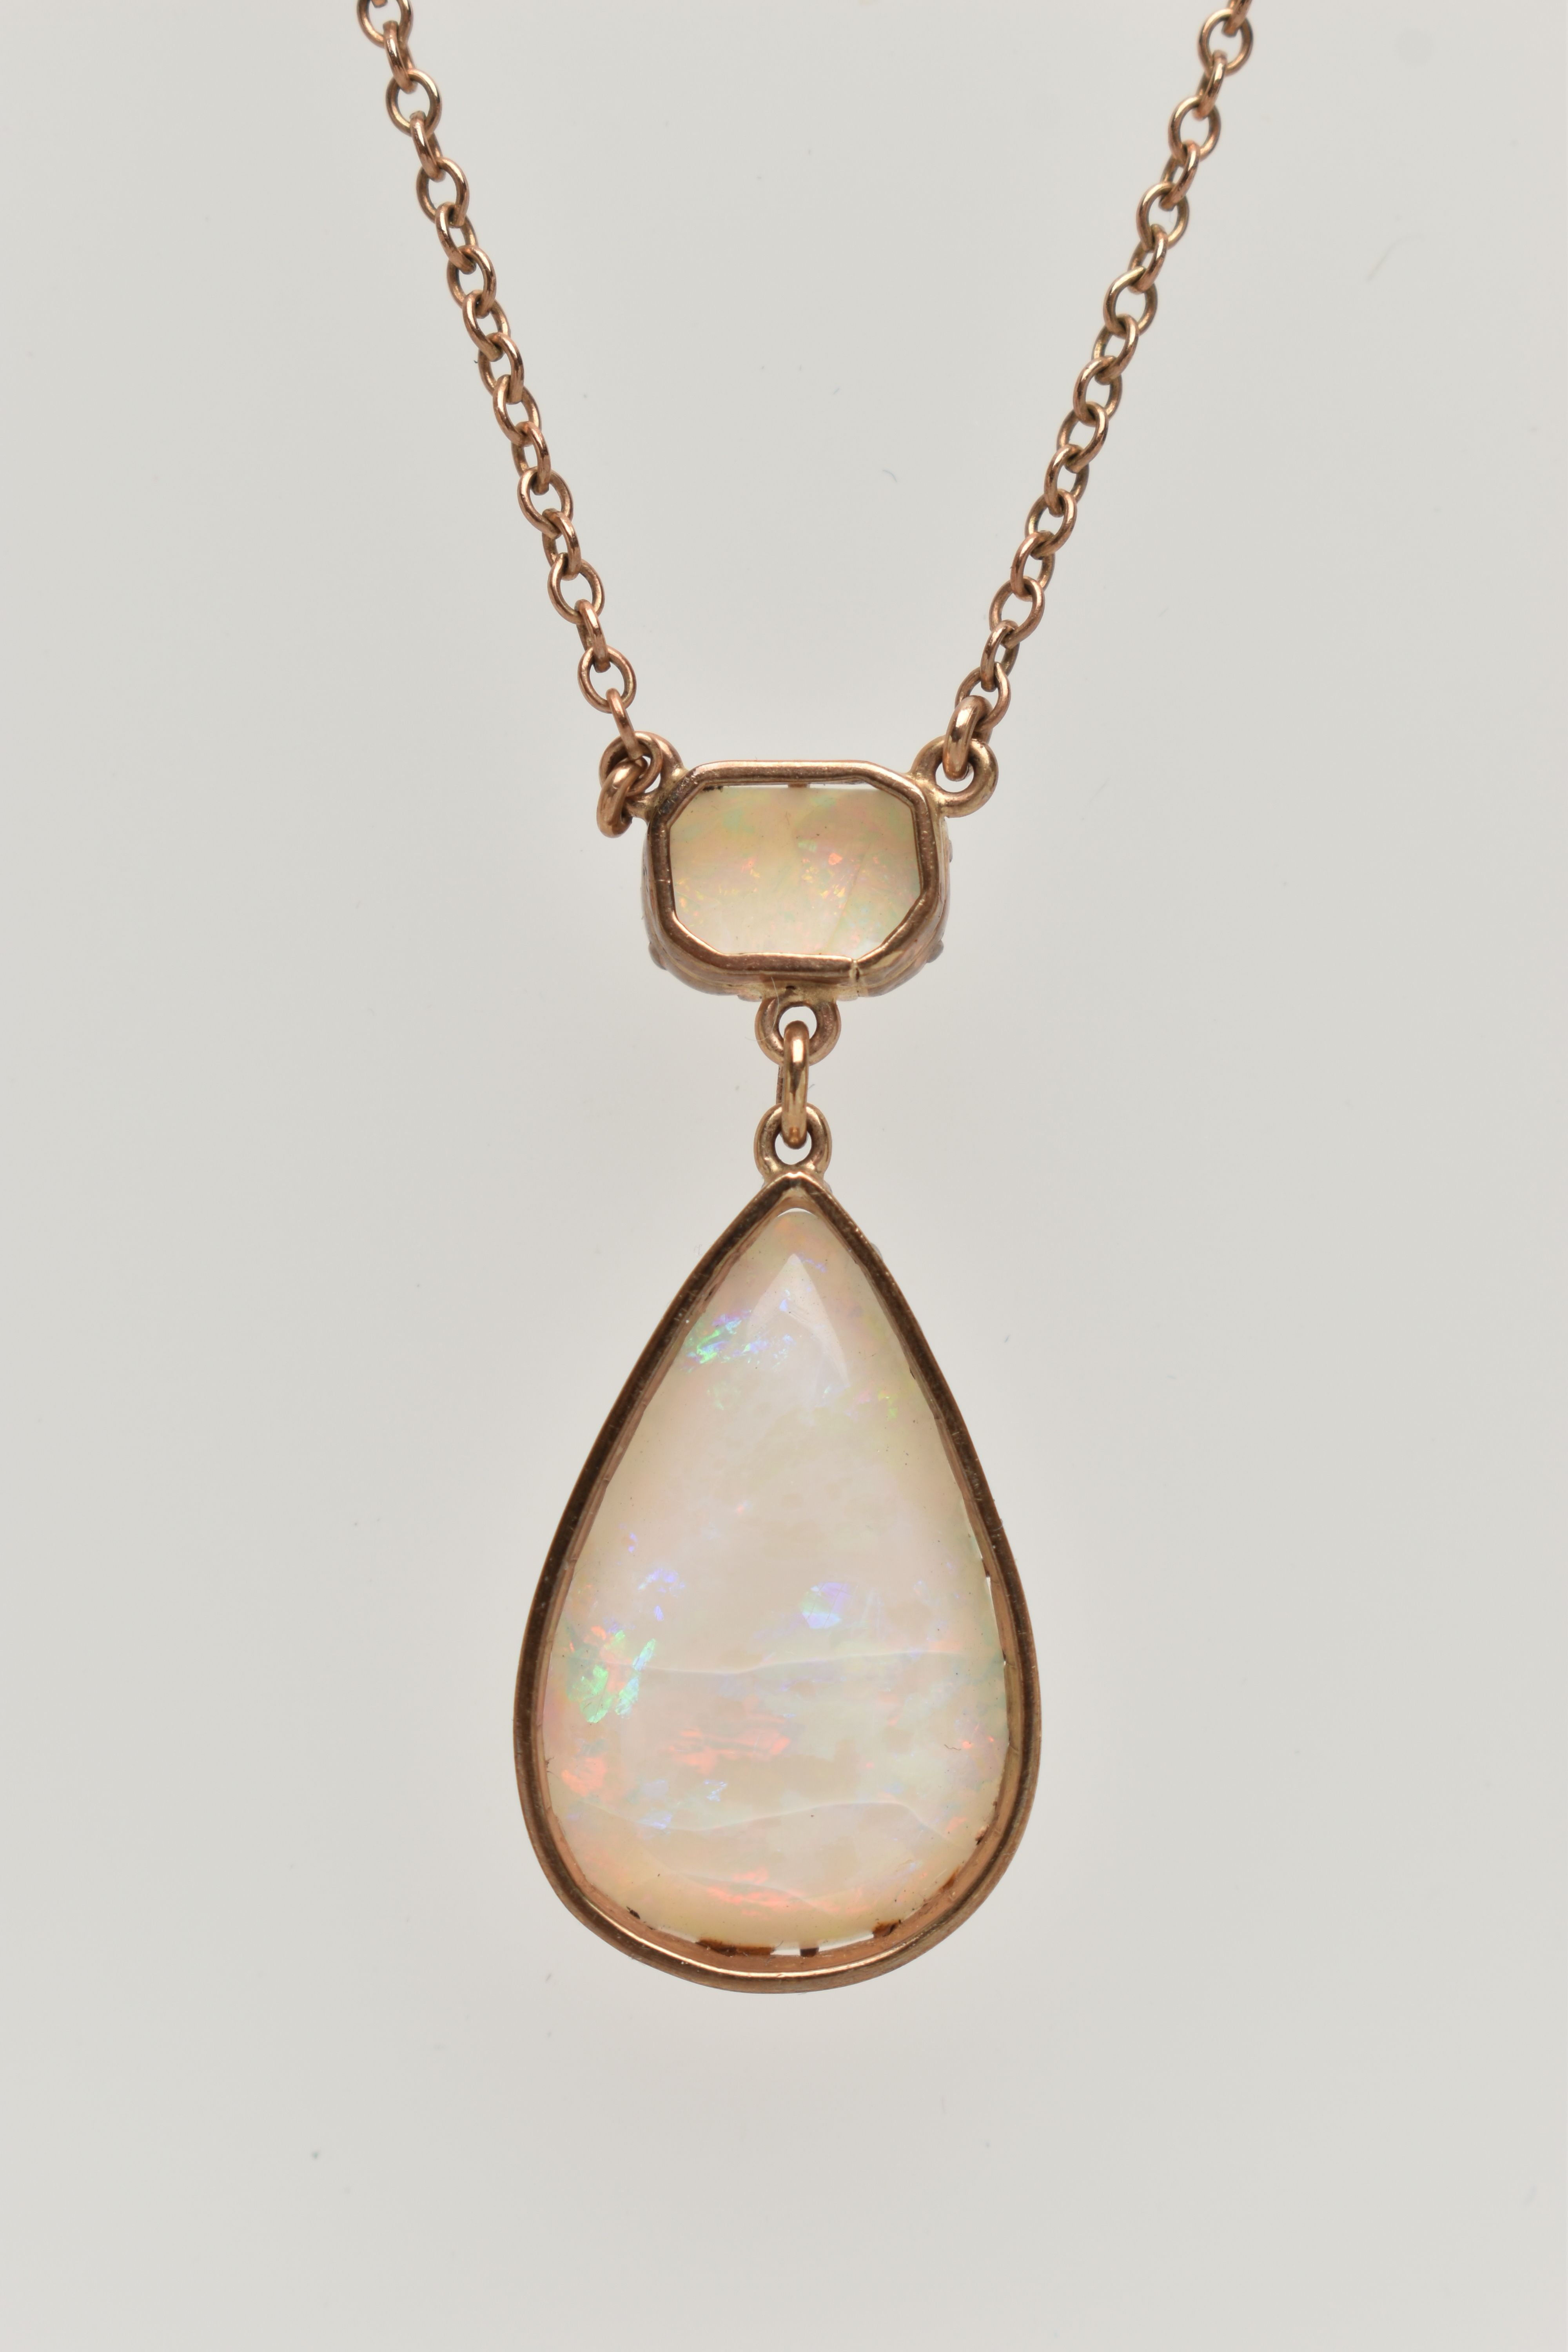 AN OPAL PENDANT NECKLACE, pear cut opal cabochon measuring approximately 22.3mm x 14.4mm, claw set - Image 5 of 5